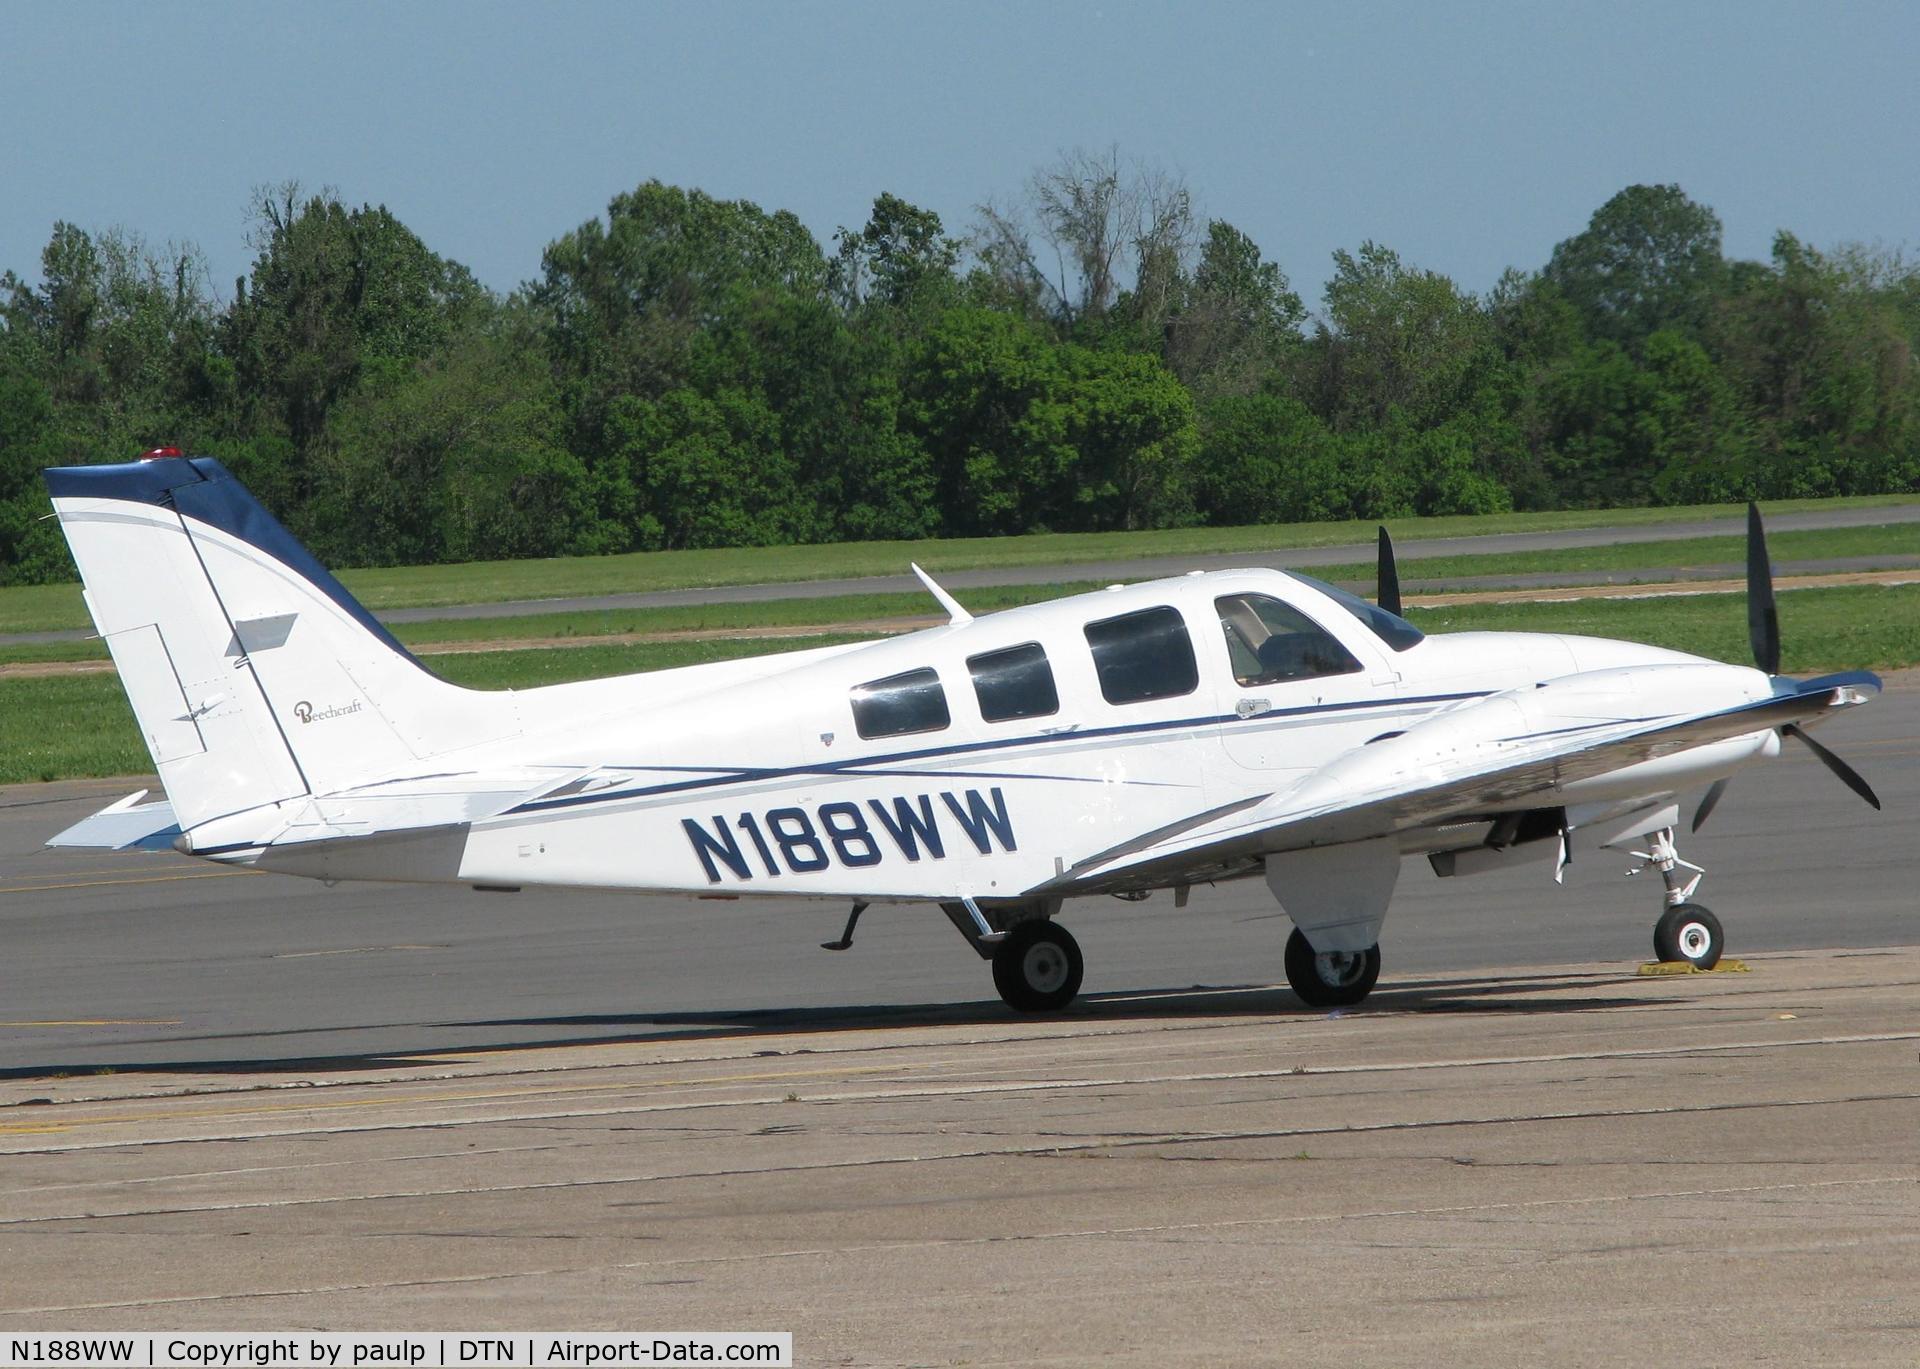 N188WW, 1976 Beech 58P Baron C/N TJ-67, Parked at the Shreveport Downtown airport.